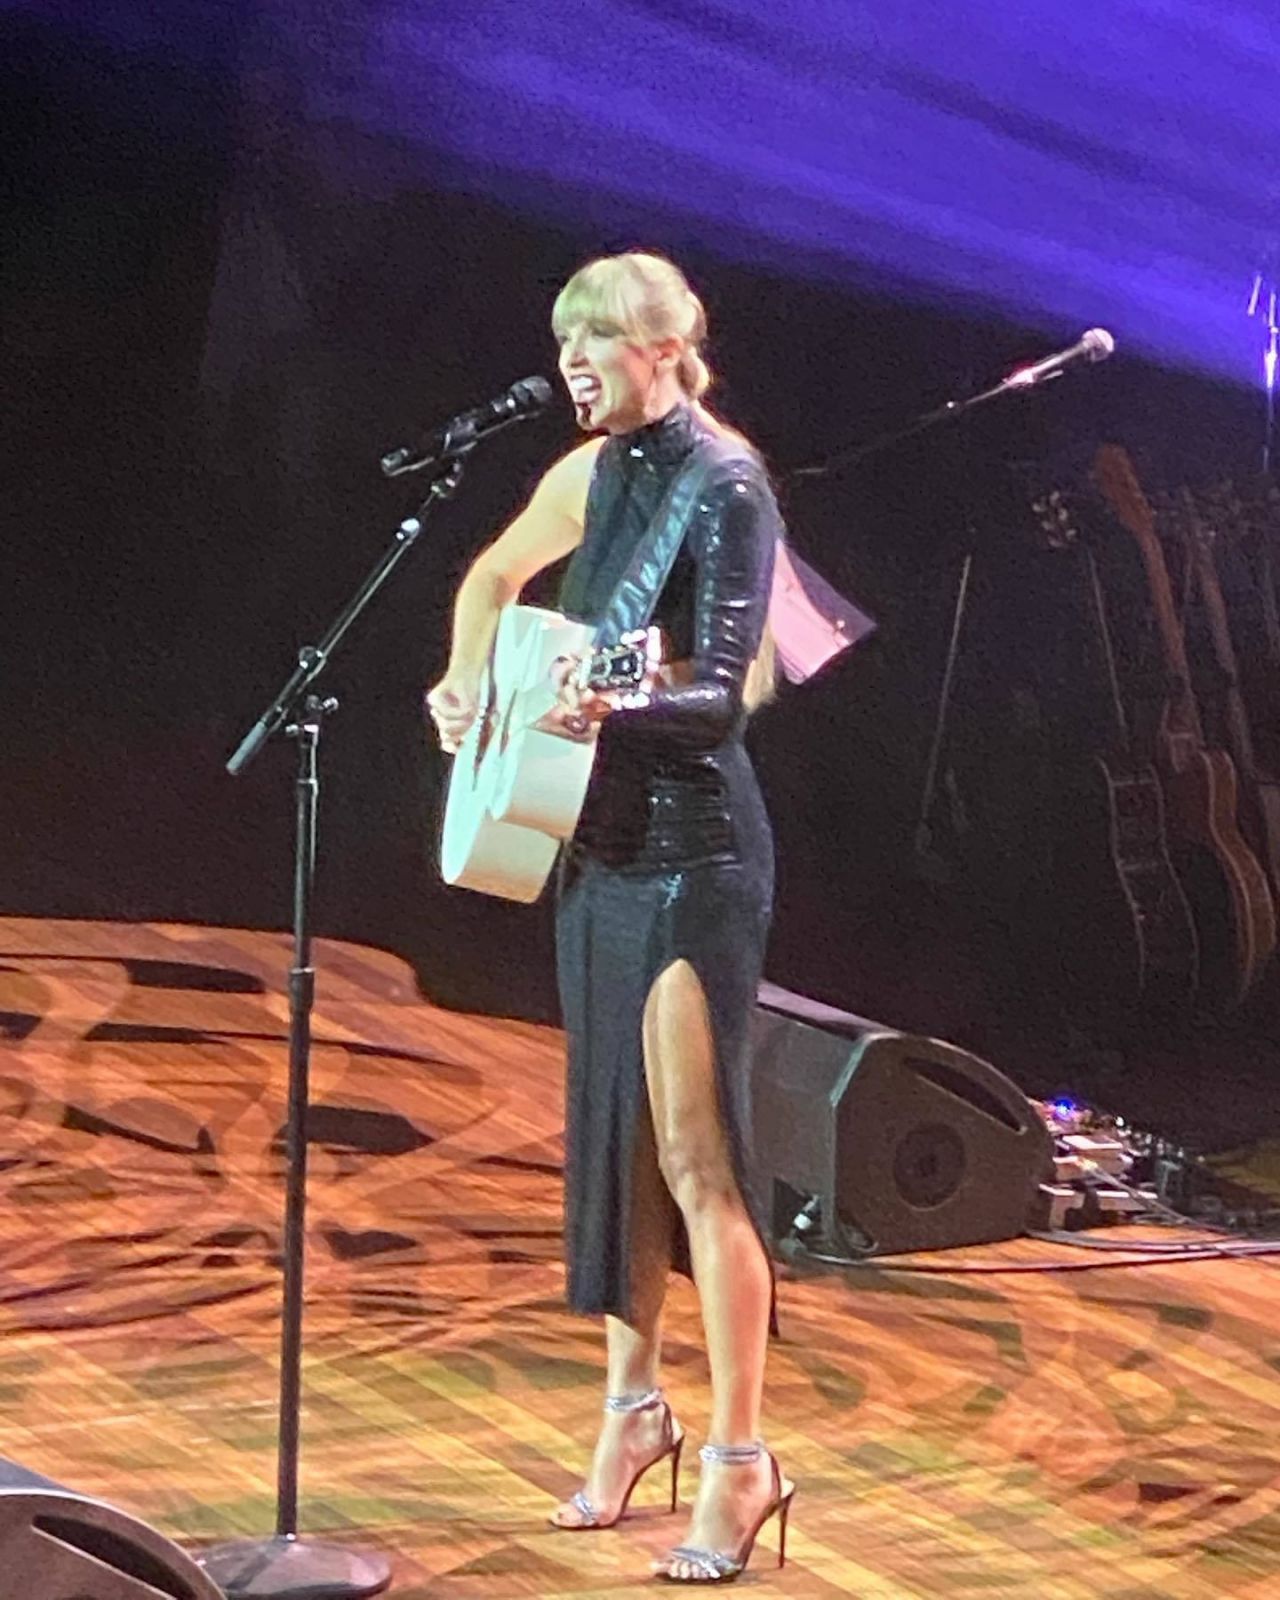 Taylor Swift performing live at Nashville songwriter awards